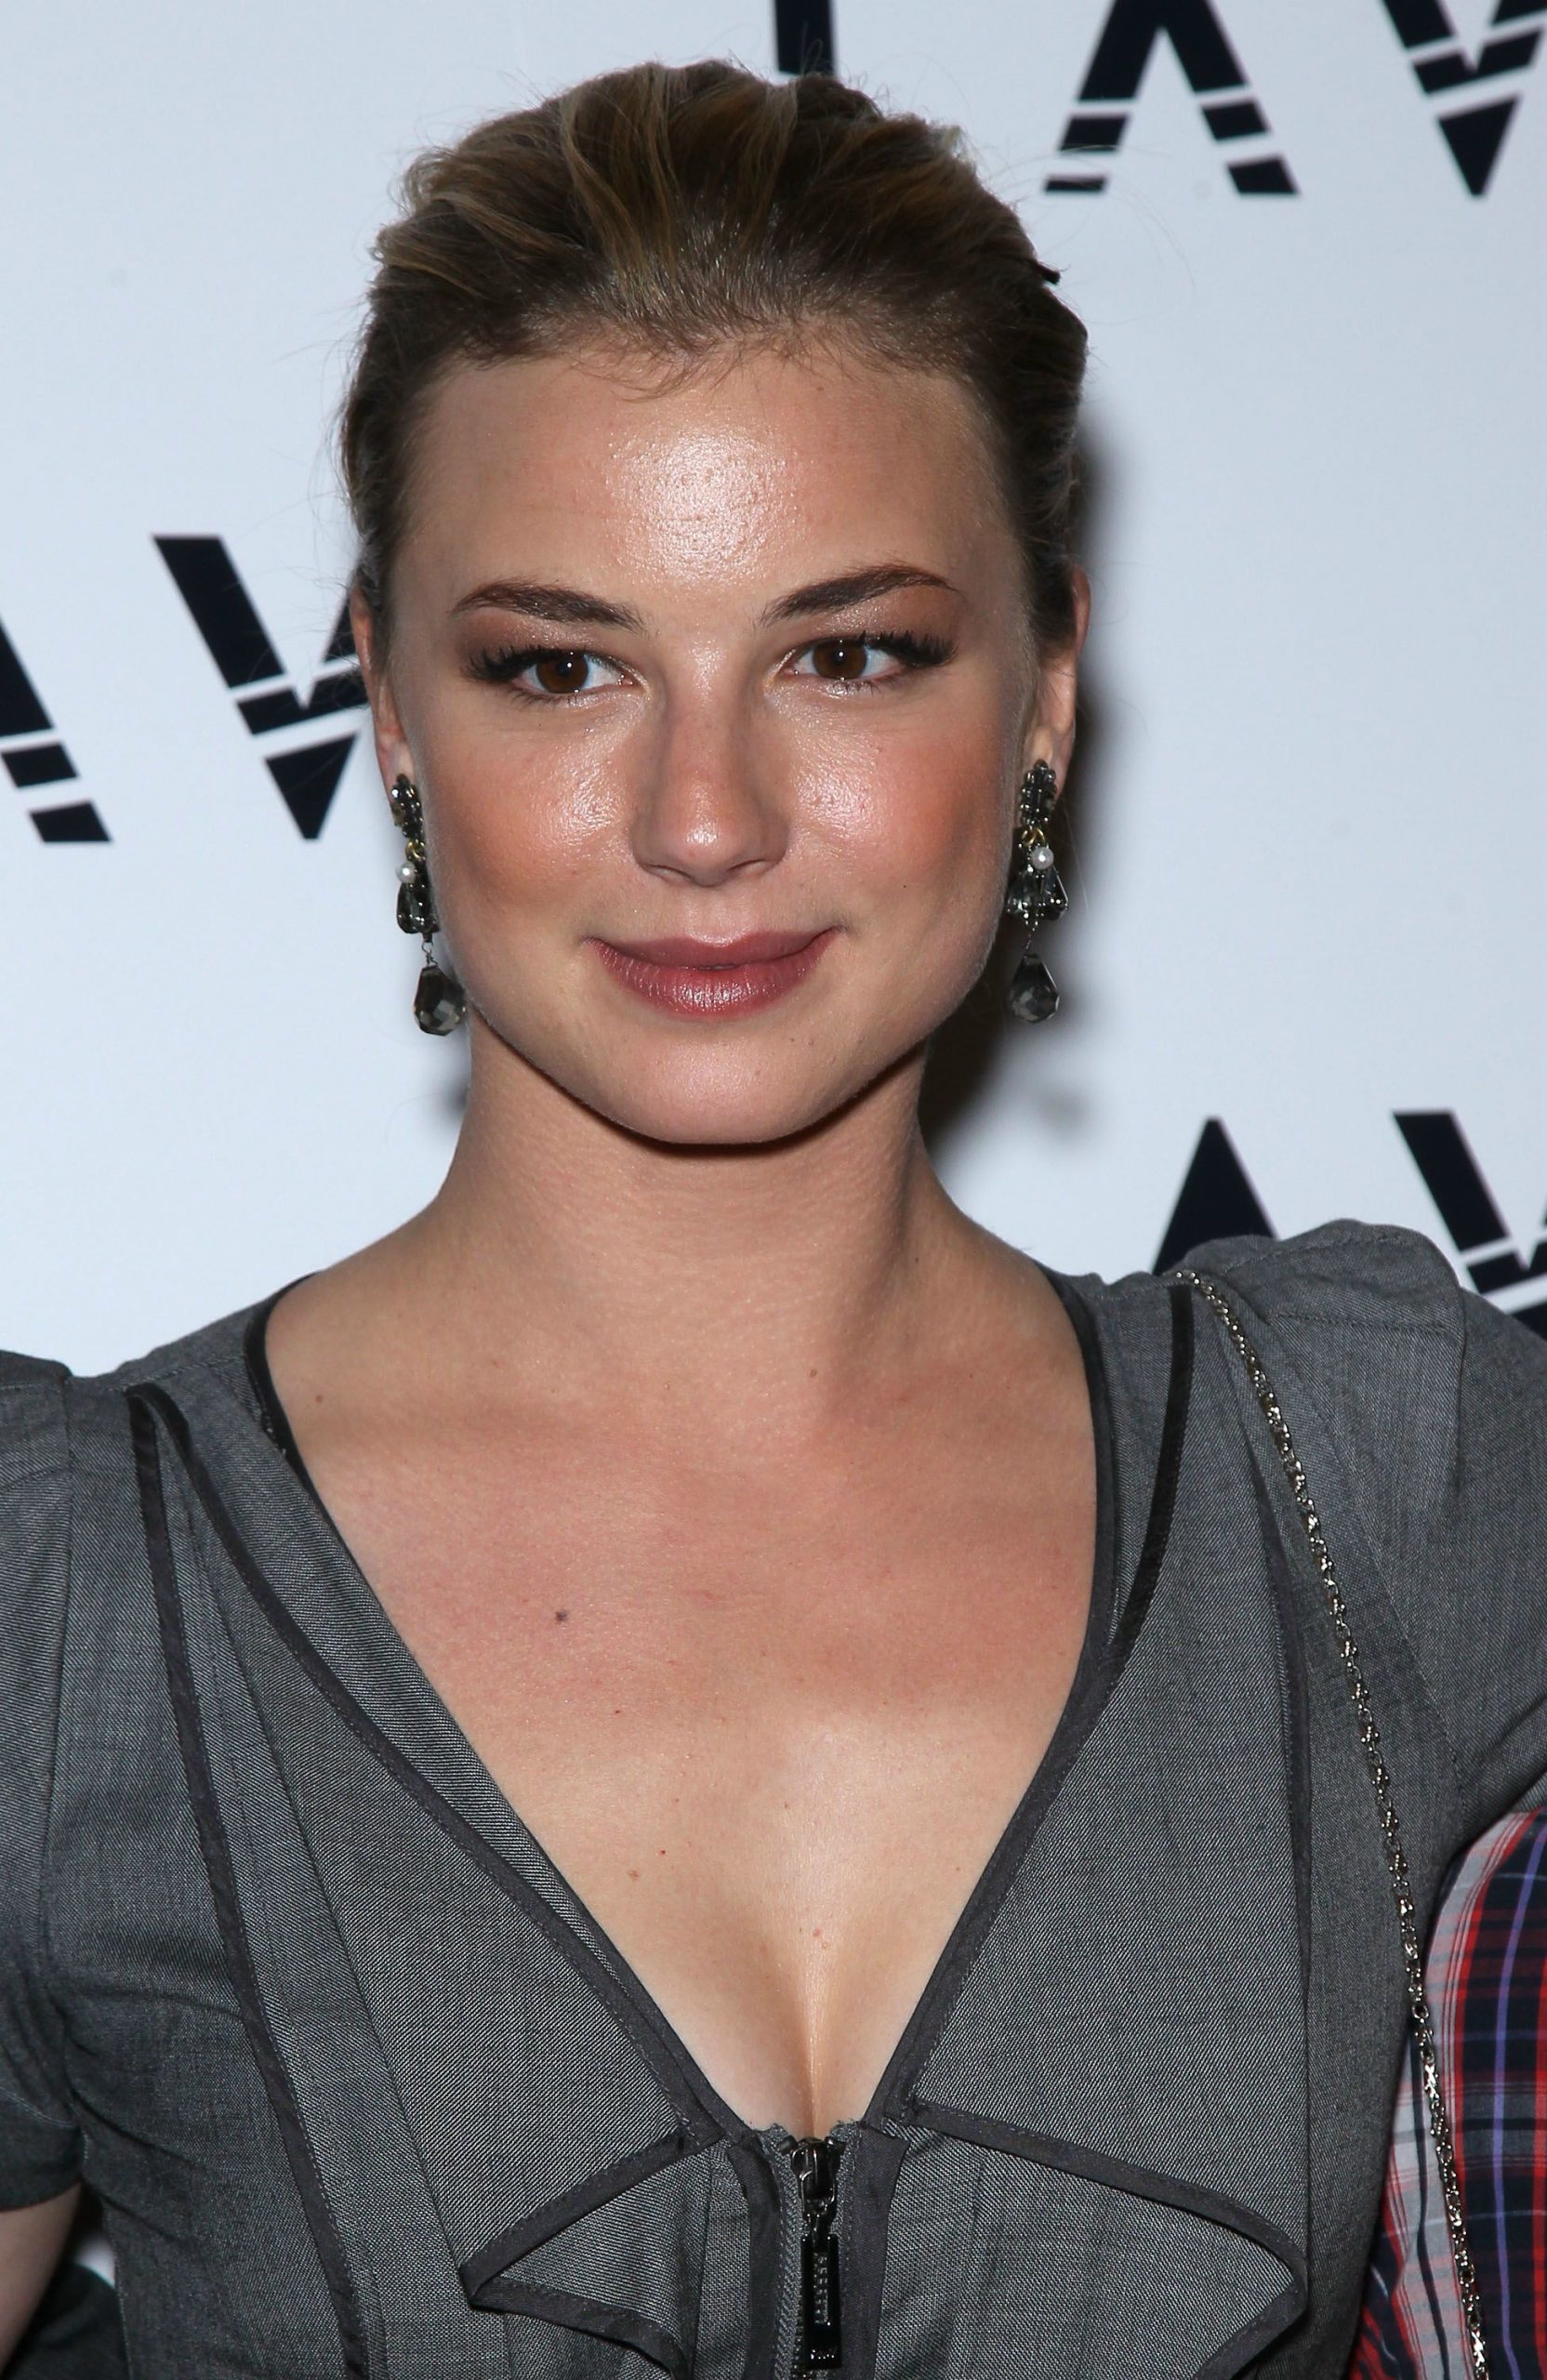 Hot Emily VanCamp Pictures: Blonde Beauty Shows Her Sideboob & More